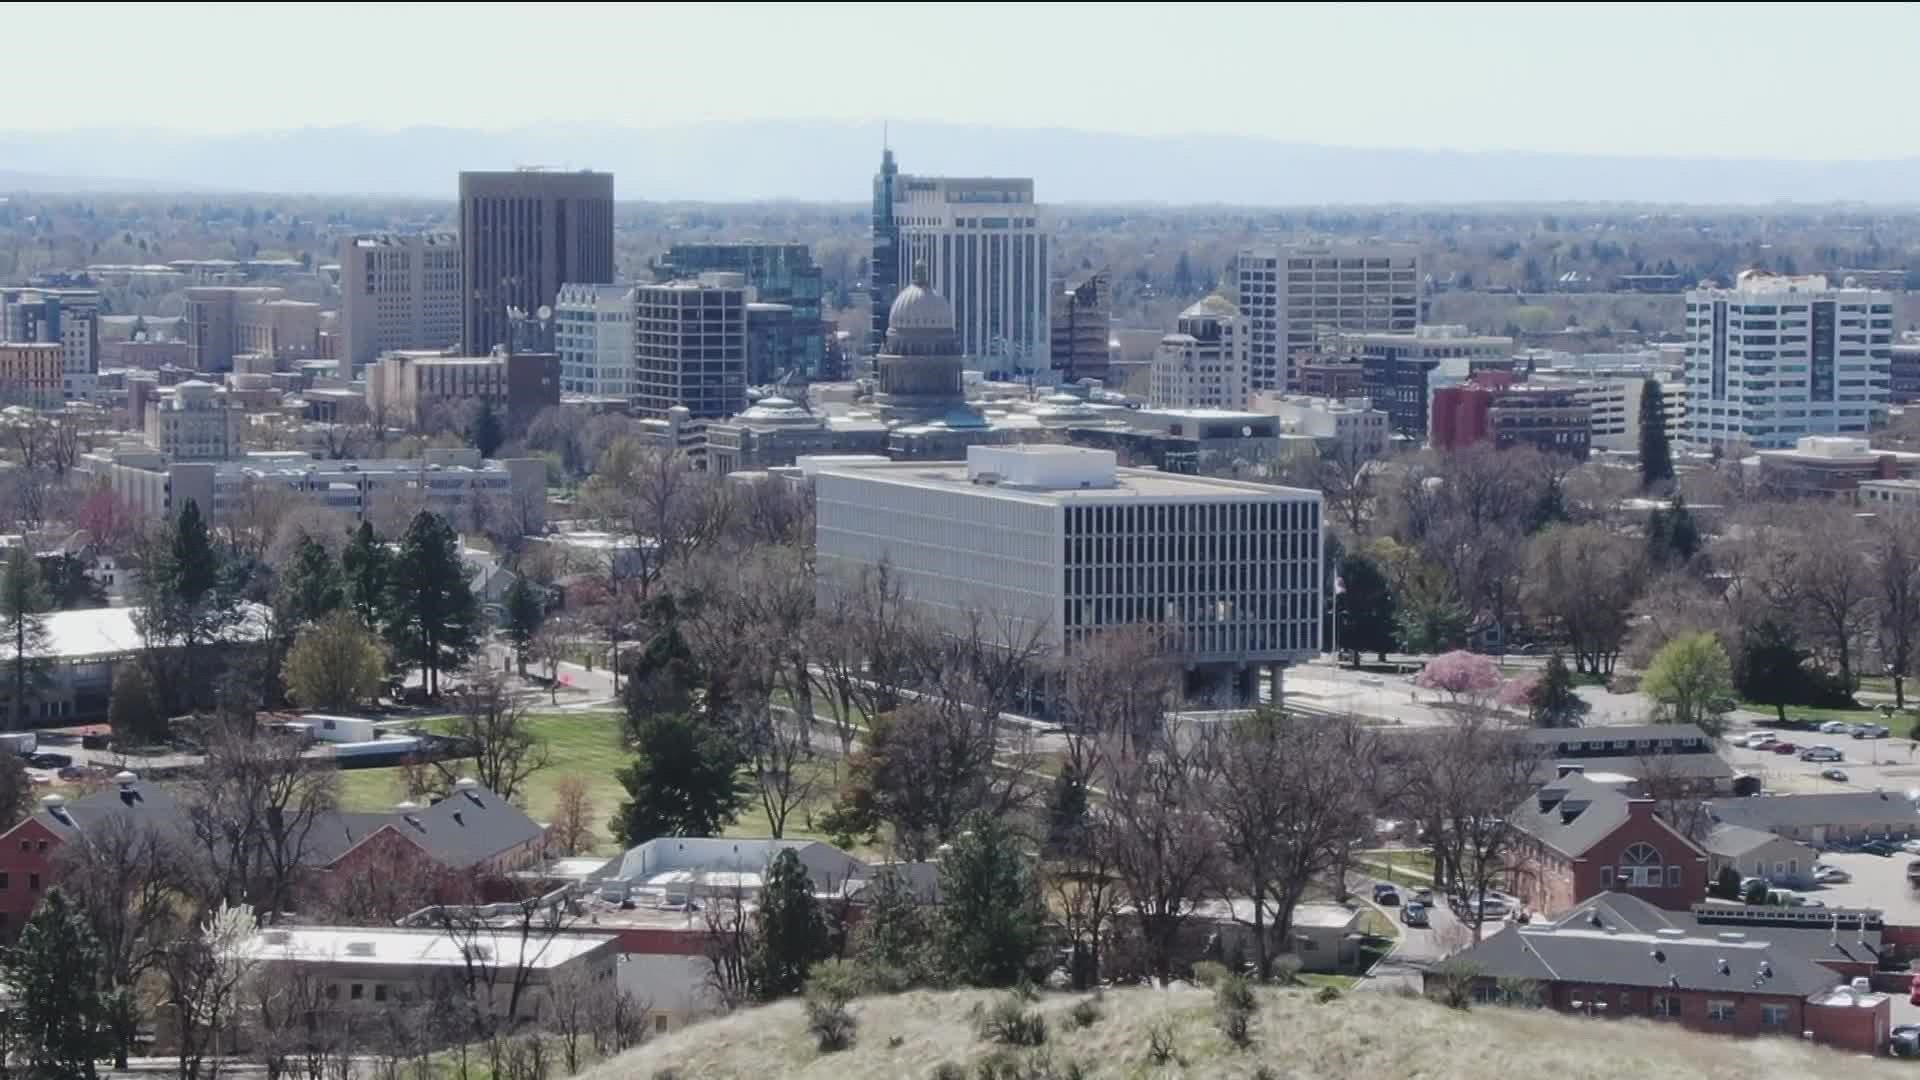 Although prices have come down slightly, rent in Boise is still high.